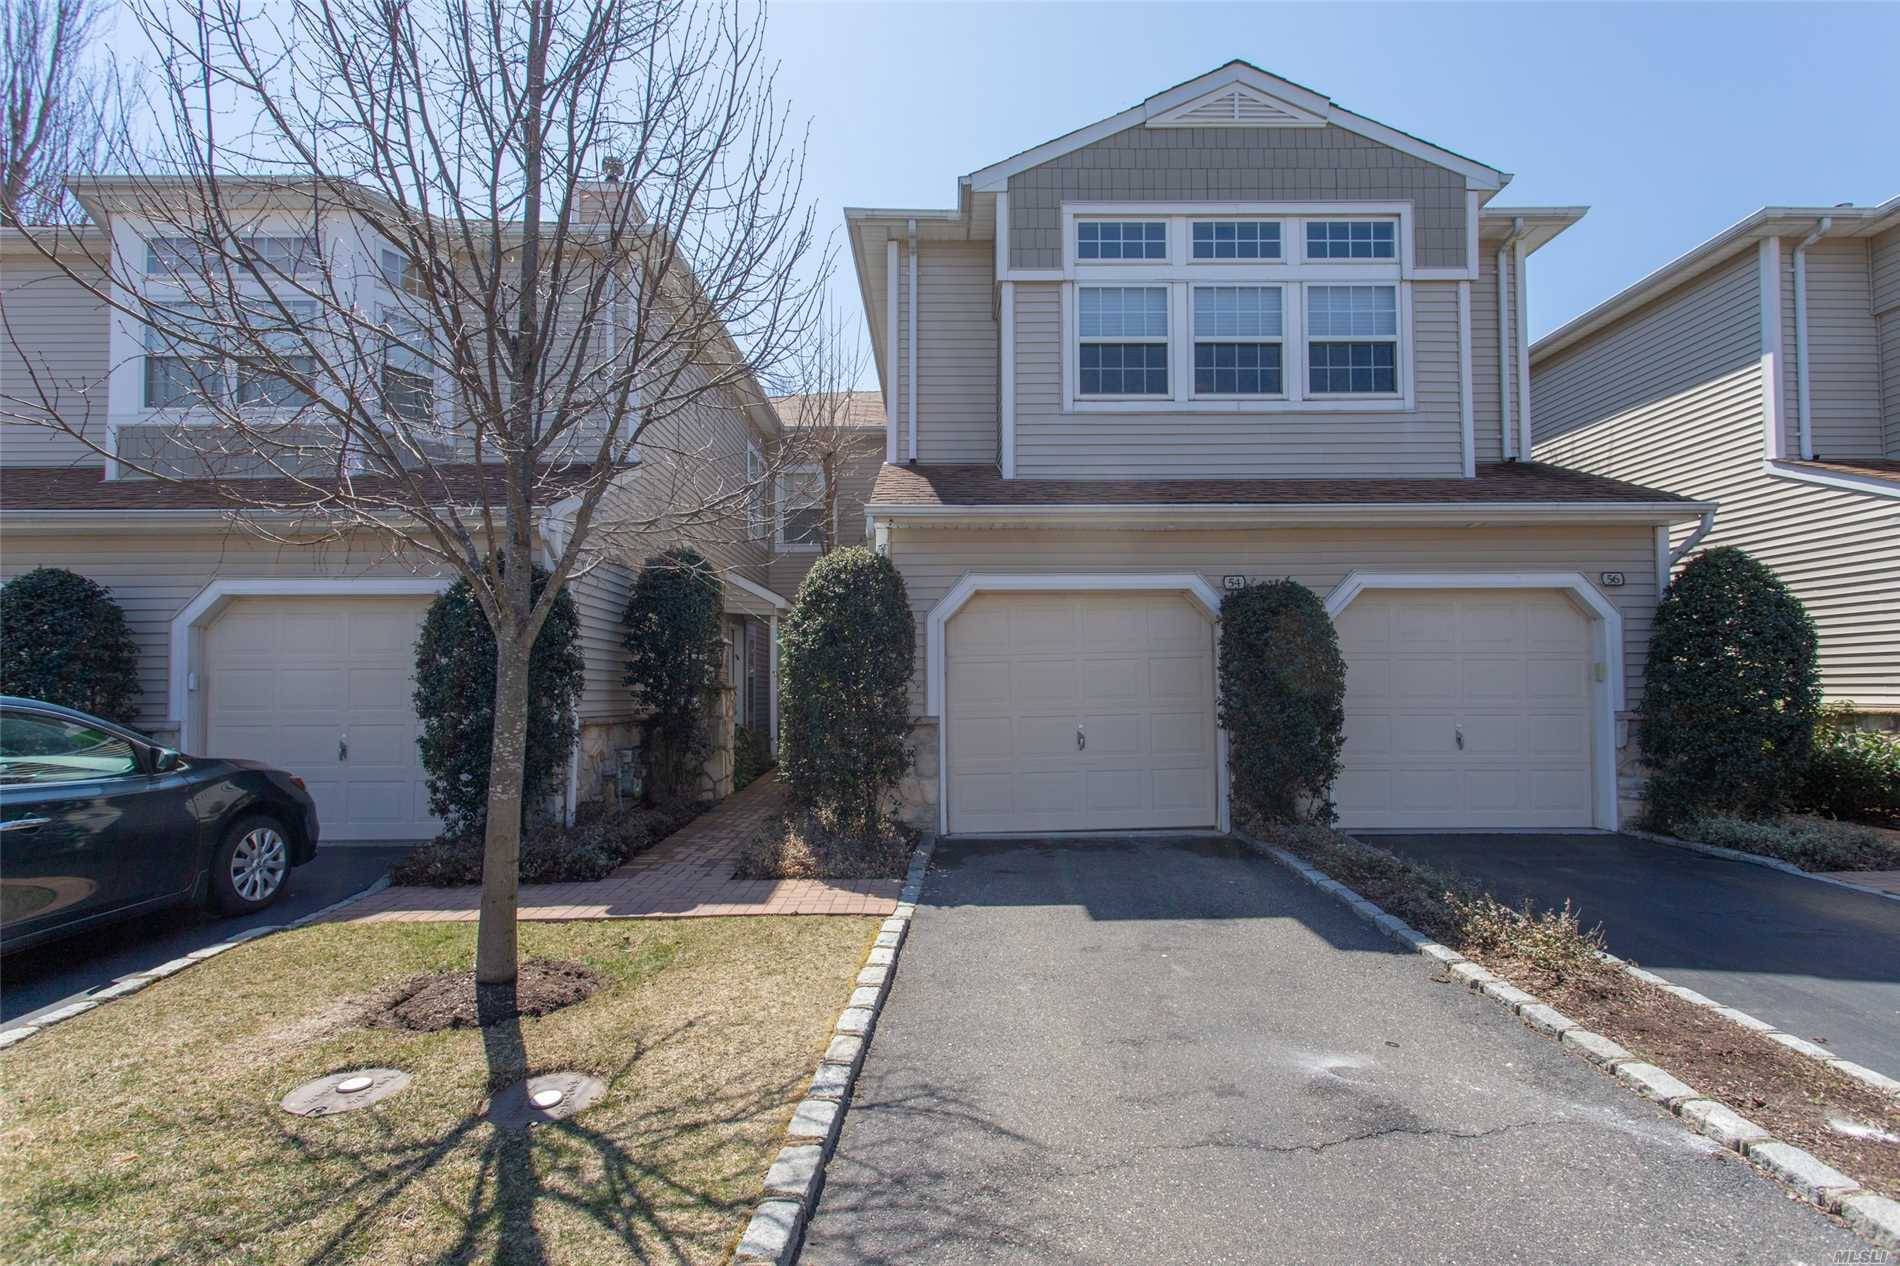 Luxury Living In The Hamlet On Olde Oyster Bay, Gated Community.